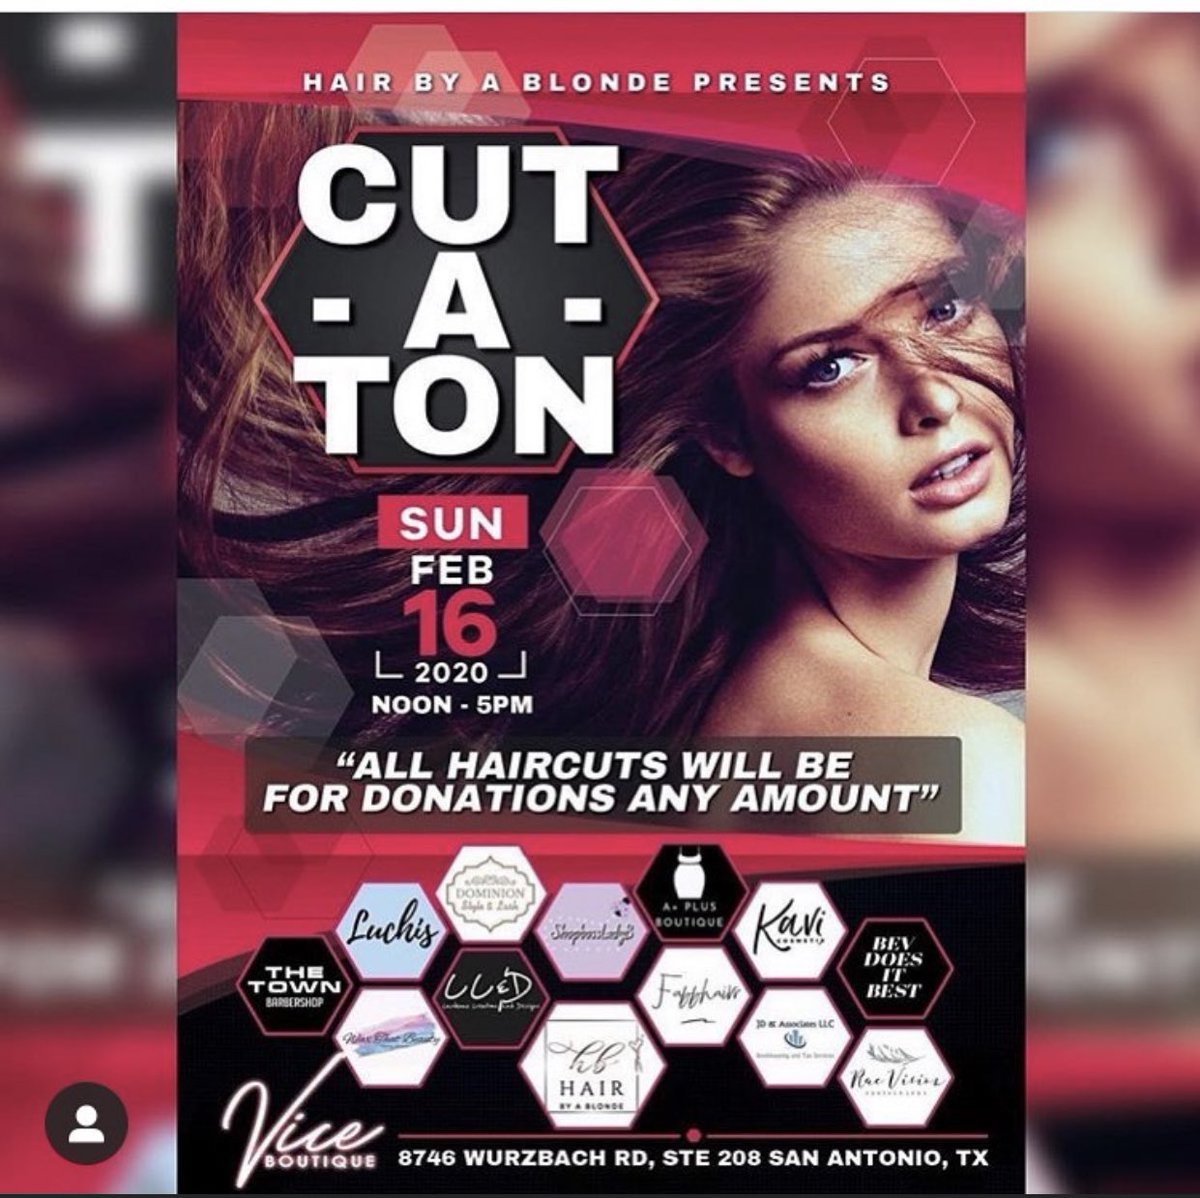 Vice is hosting the cut-a-thon with the beautiful hairbyablonde. Don’t forget to stop by from noon-5:00 Sunday February 16th! #smallbusinessowner #smallbusiness #helpingotherssucceed #cosmetology #cosmetologyschool #sanantonioriverwalk #sanantoniomodel #boutiqueshopping